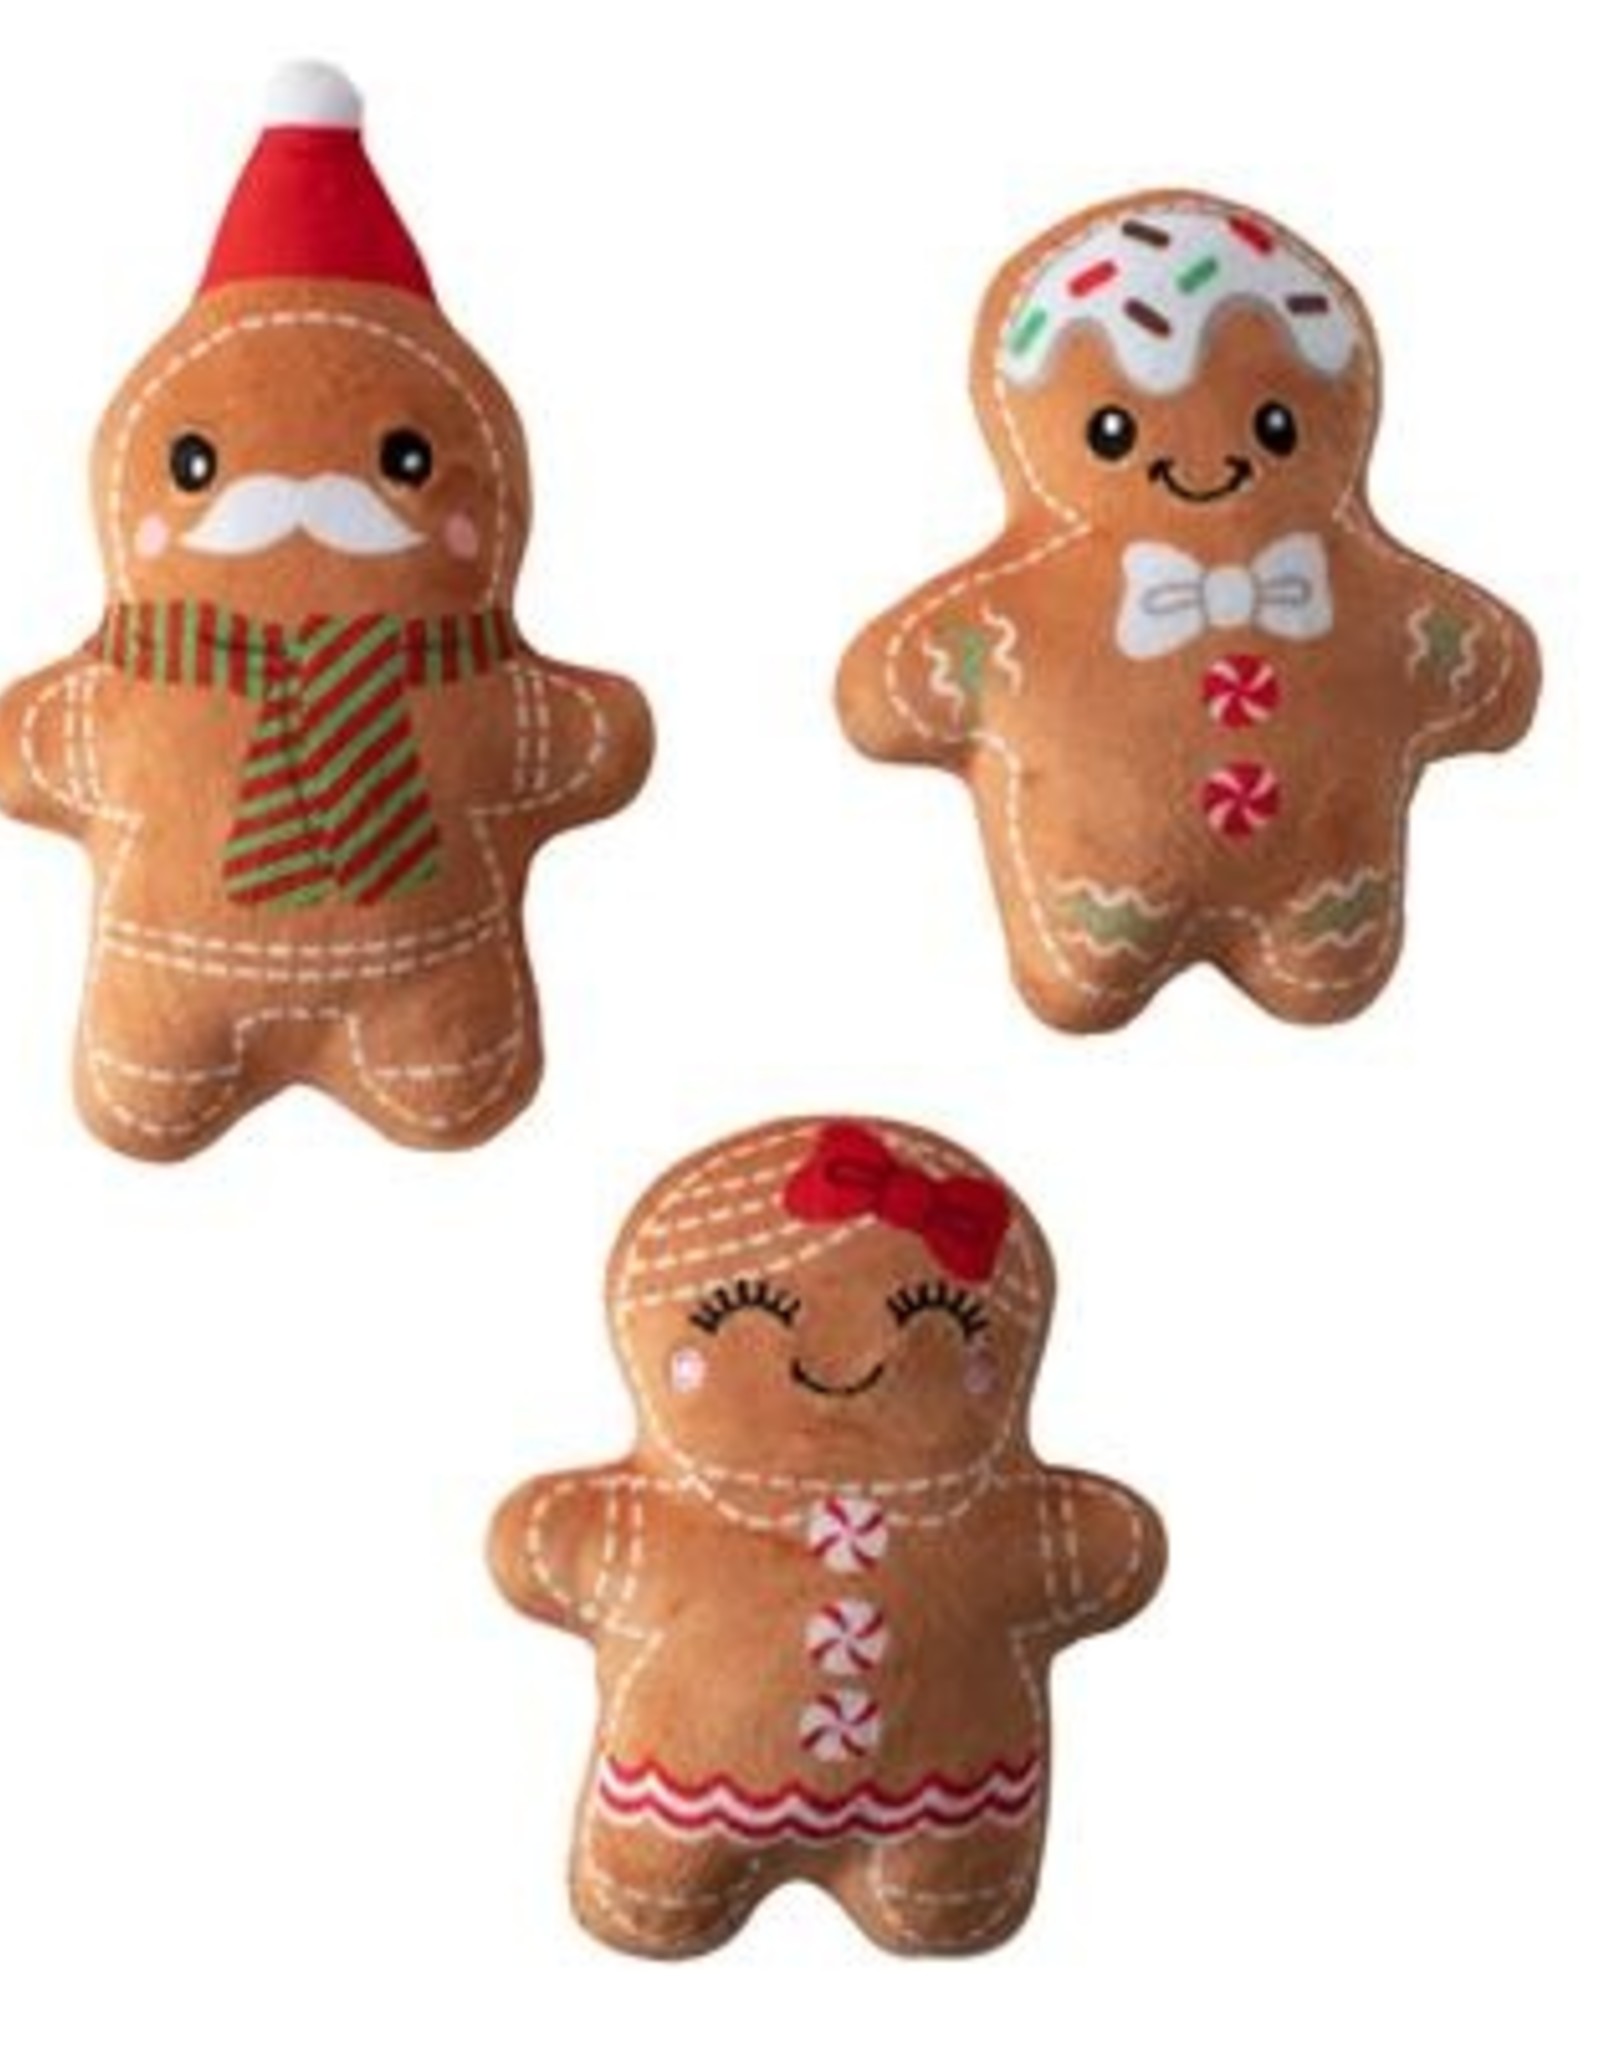 Pet Shop by Fringe Studio Pet Shop by Fringe Studio Gingerbread Everything Small Plush Dog Toys - Set of 3